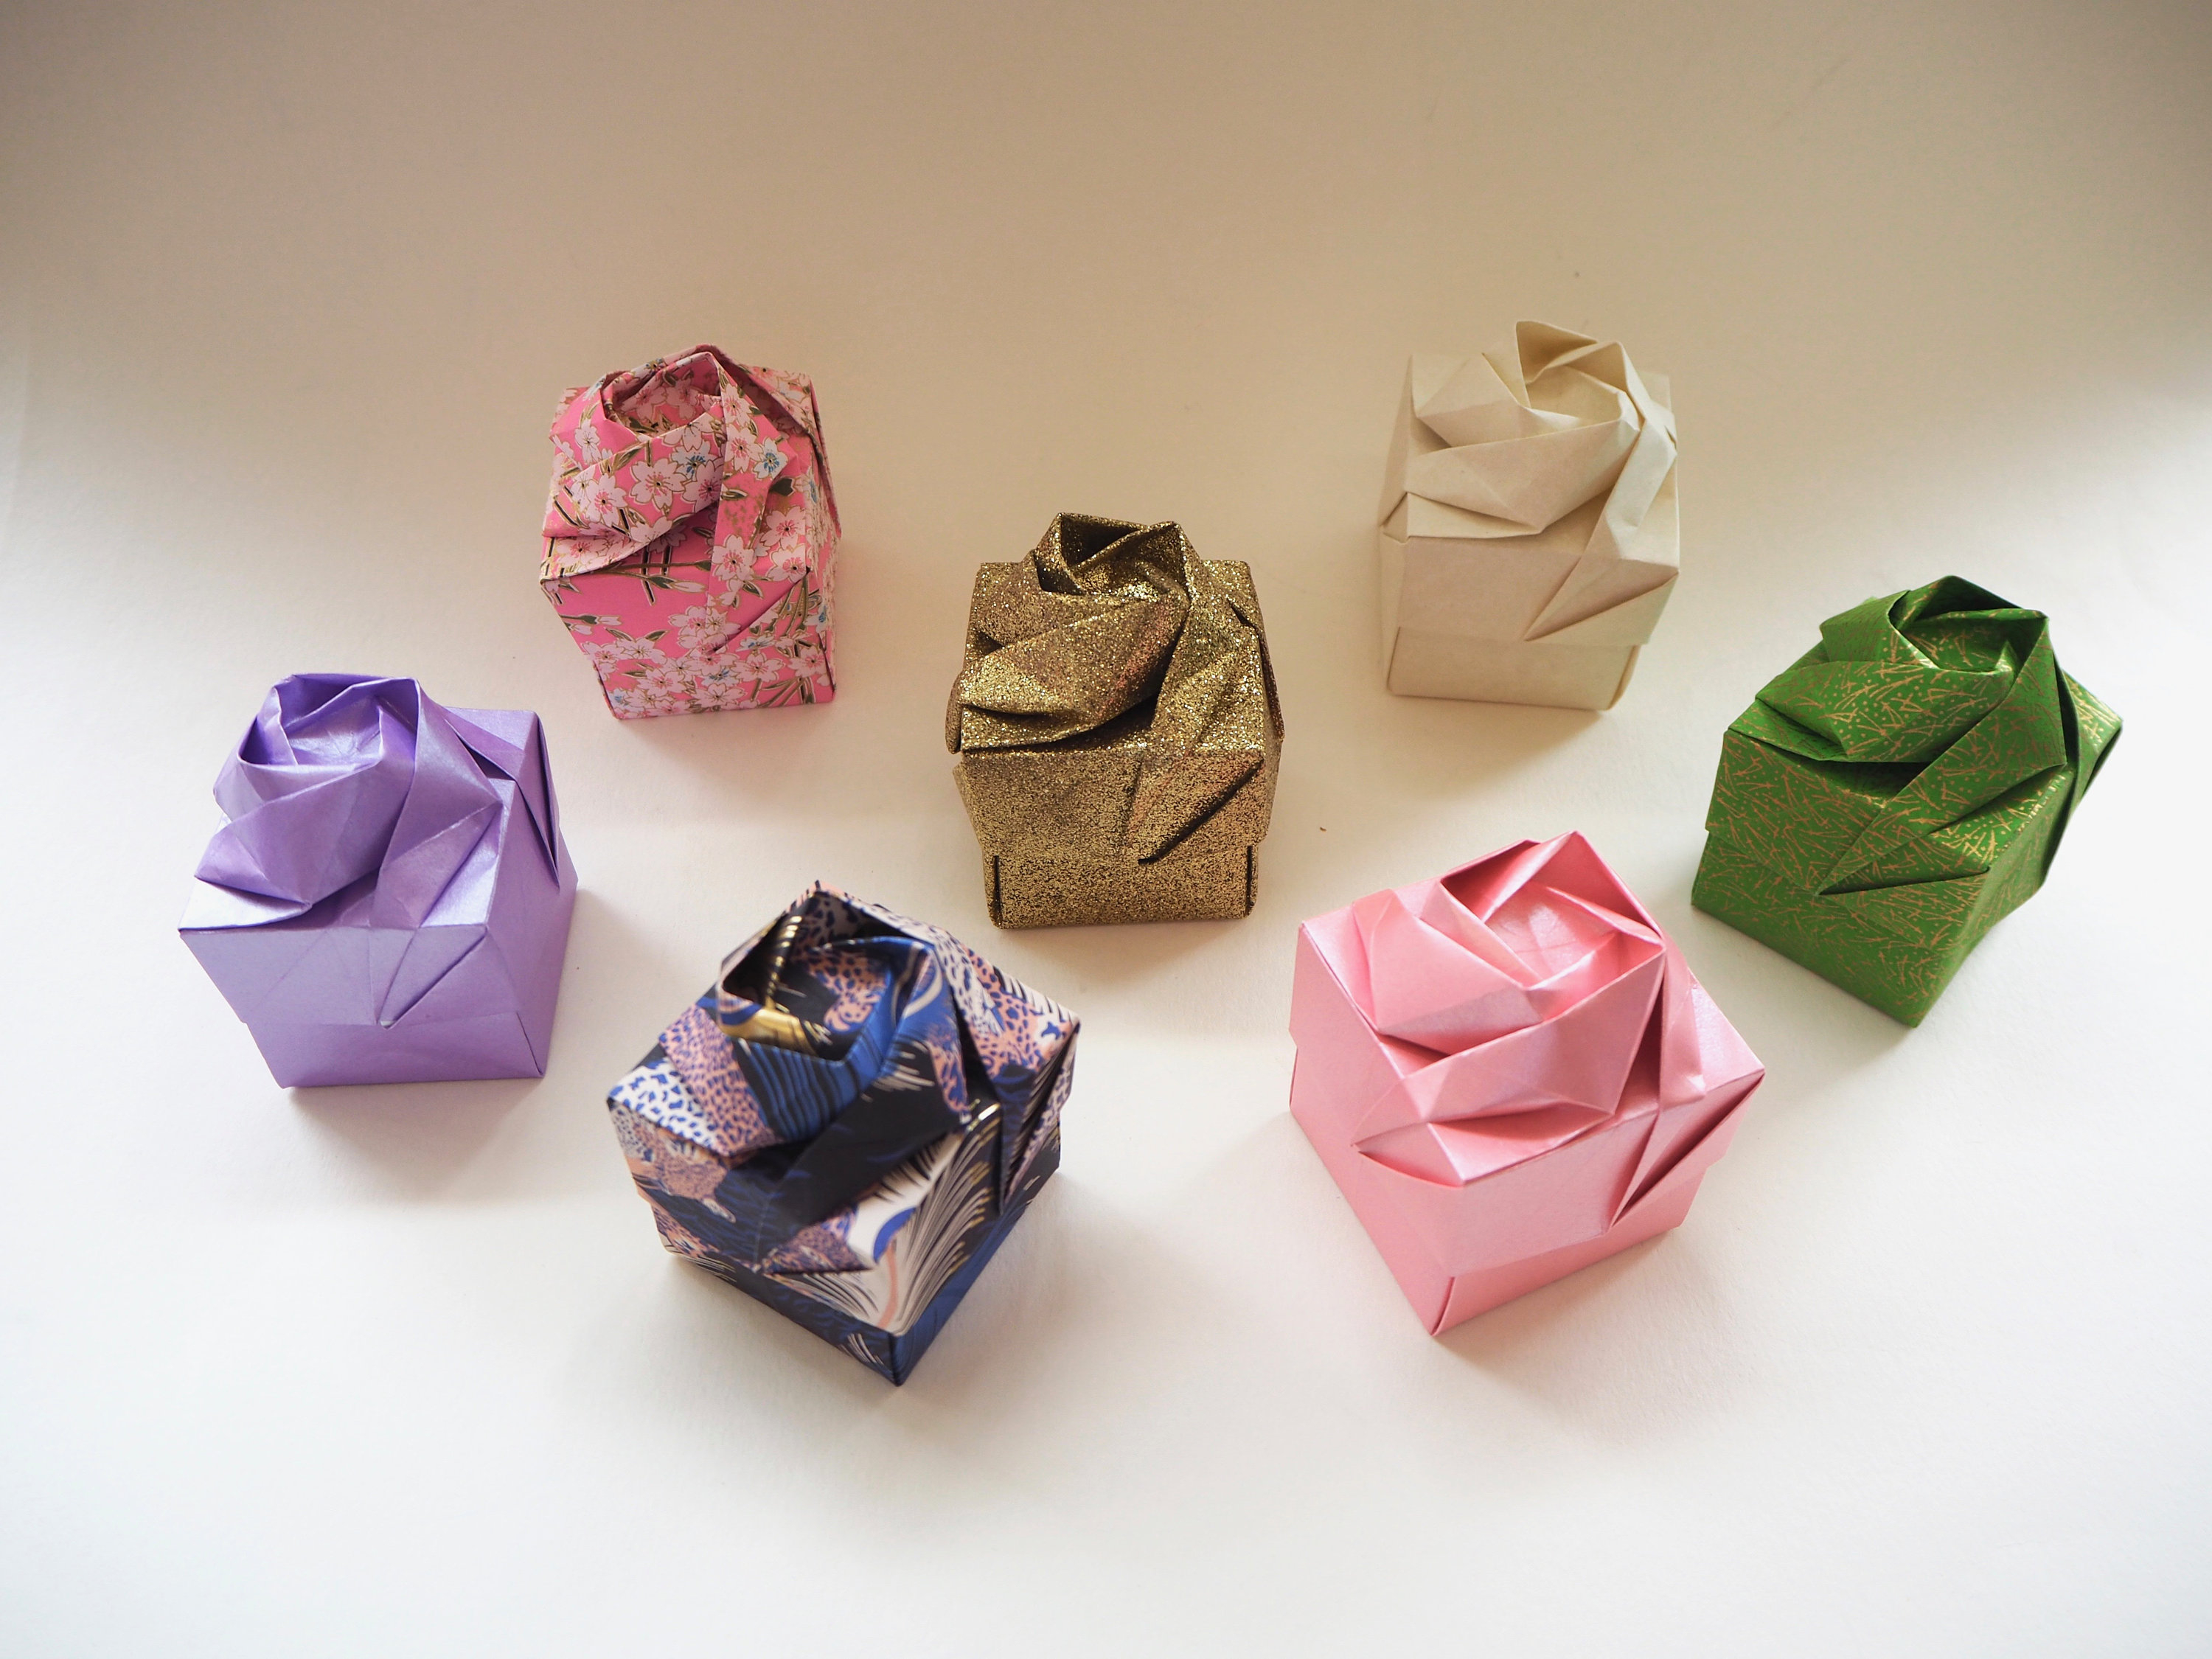 Origami Gifts For Her Handmade Origami Rose Gift Box Valentines Wedding Gift Proposal Jewellery Sweet Ring Box Mothers Day Gift Ideas Gifts For Her